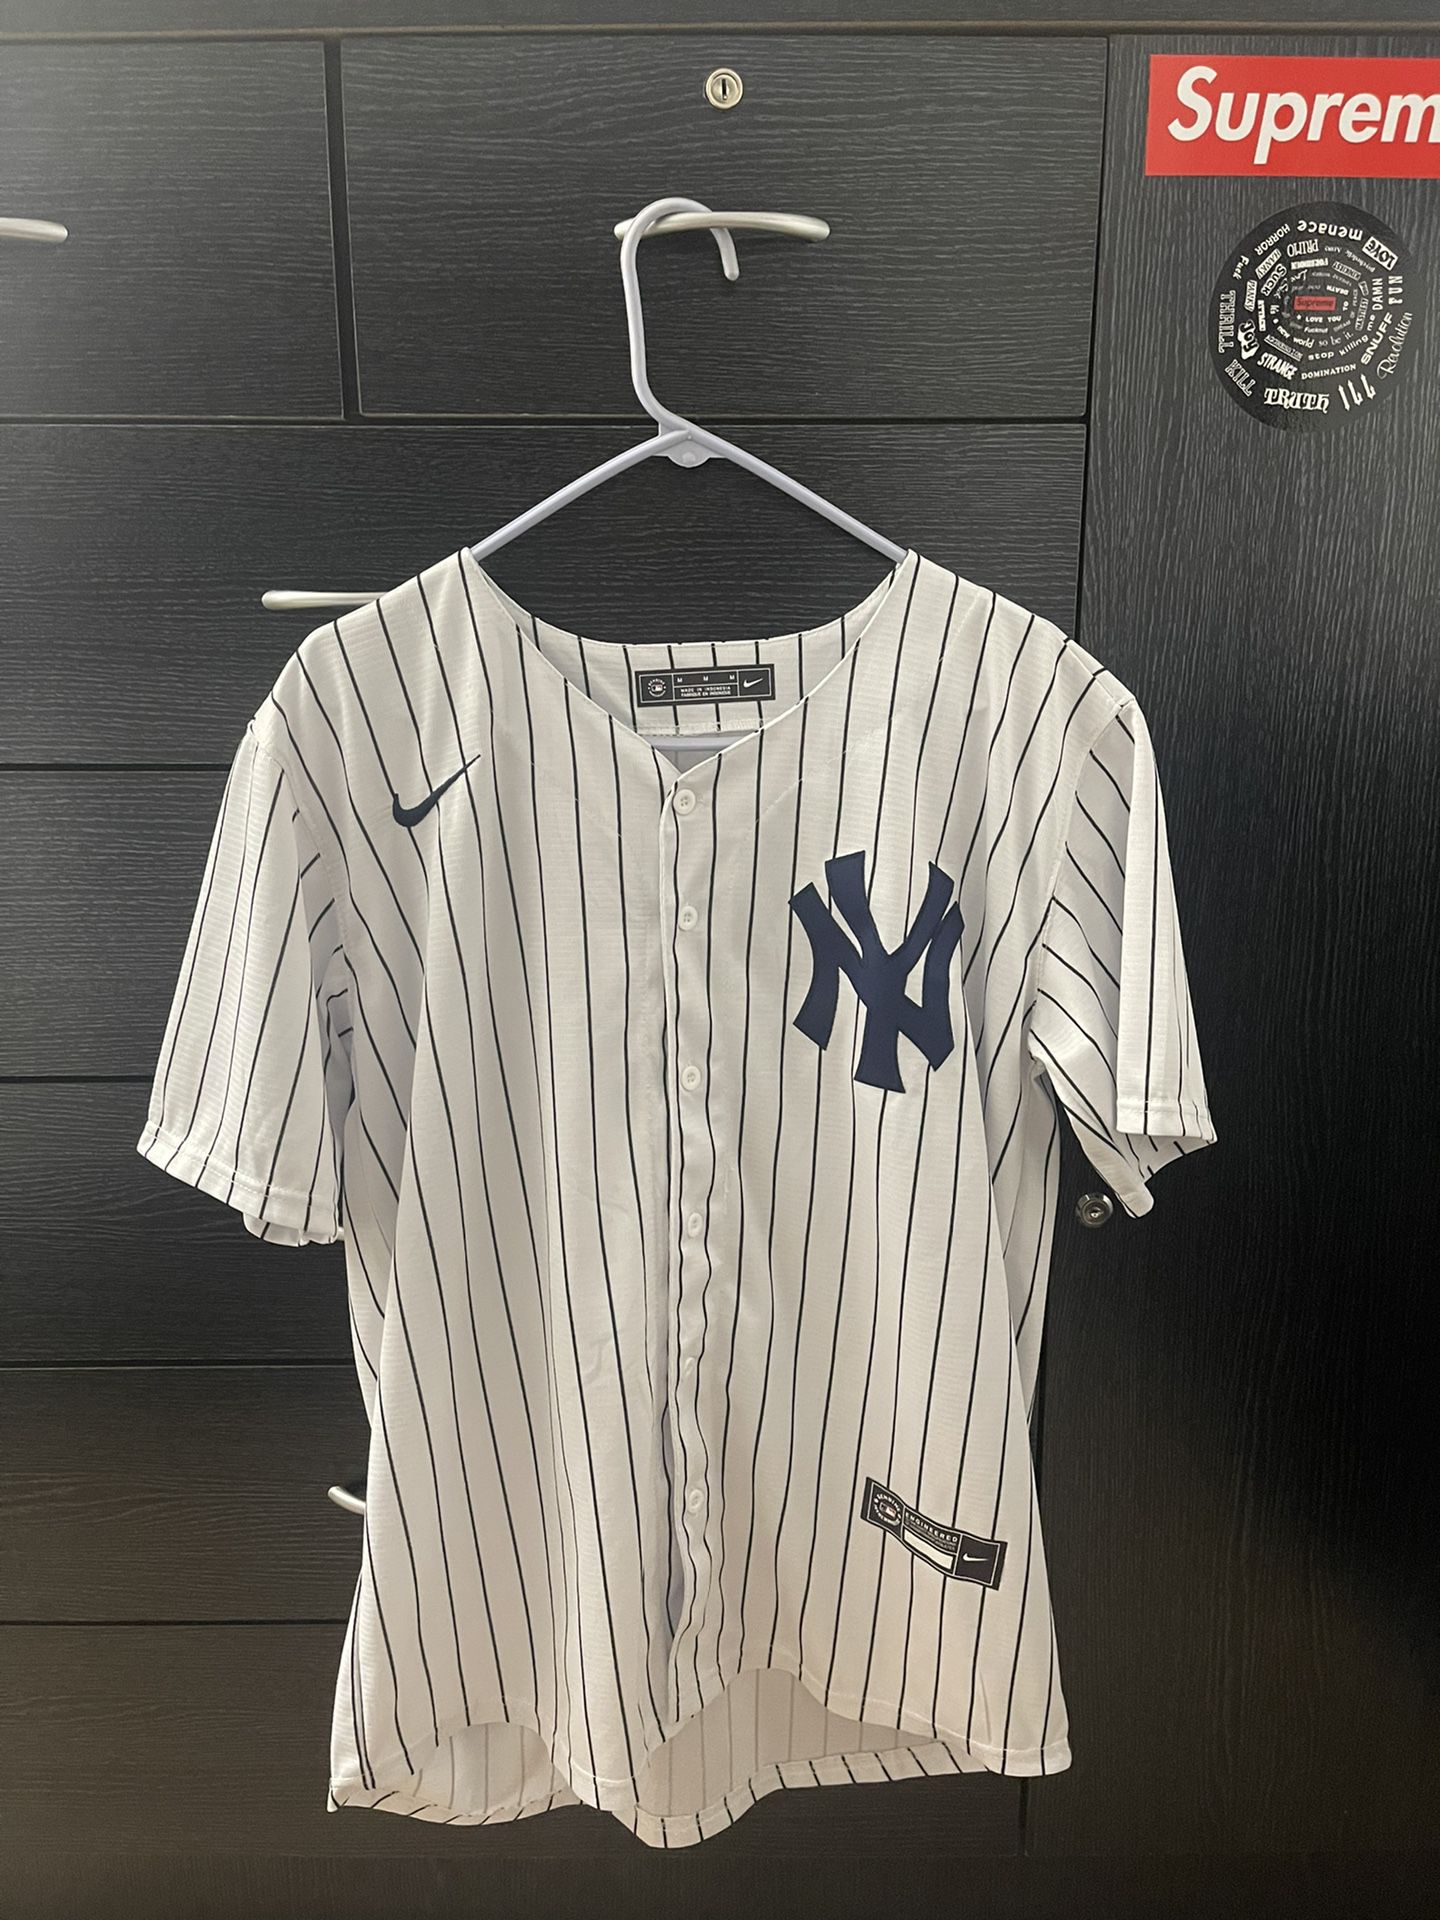 New York Yankees Derek Jeter Jersey for Sale in East Northport, NY - OfferUp